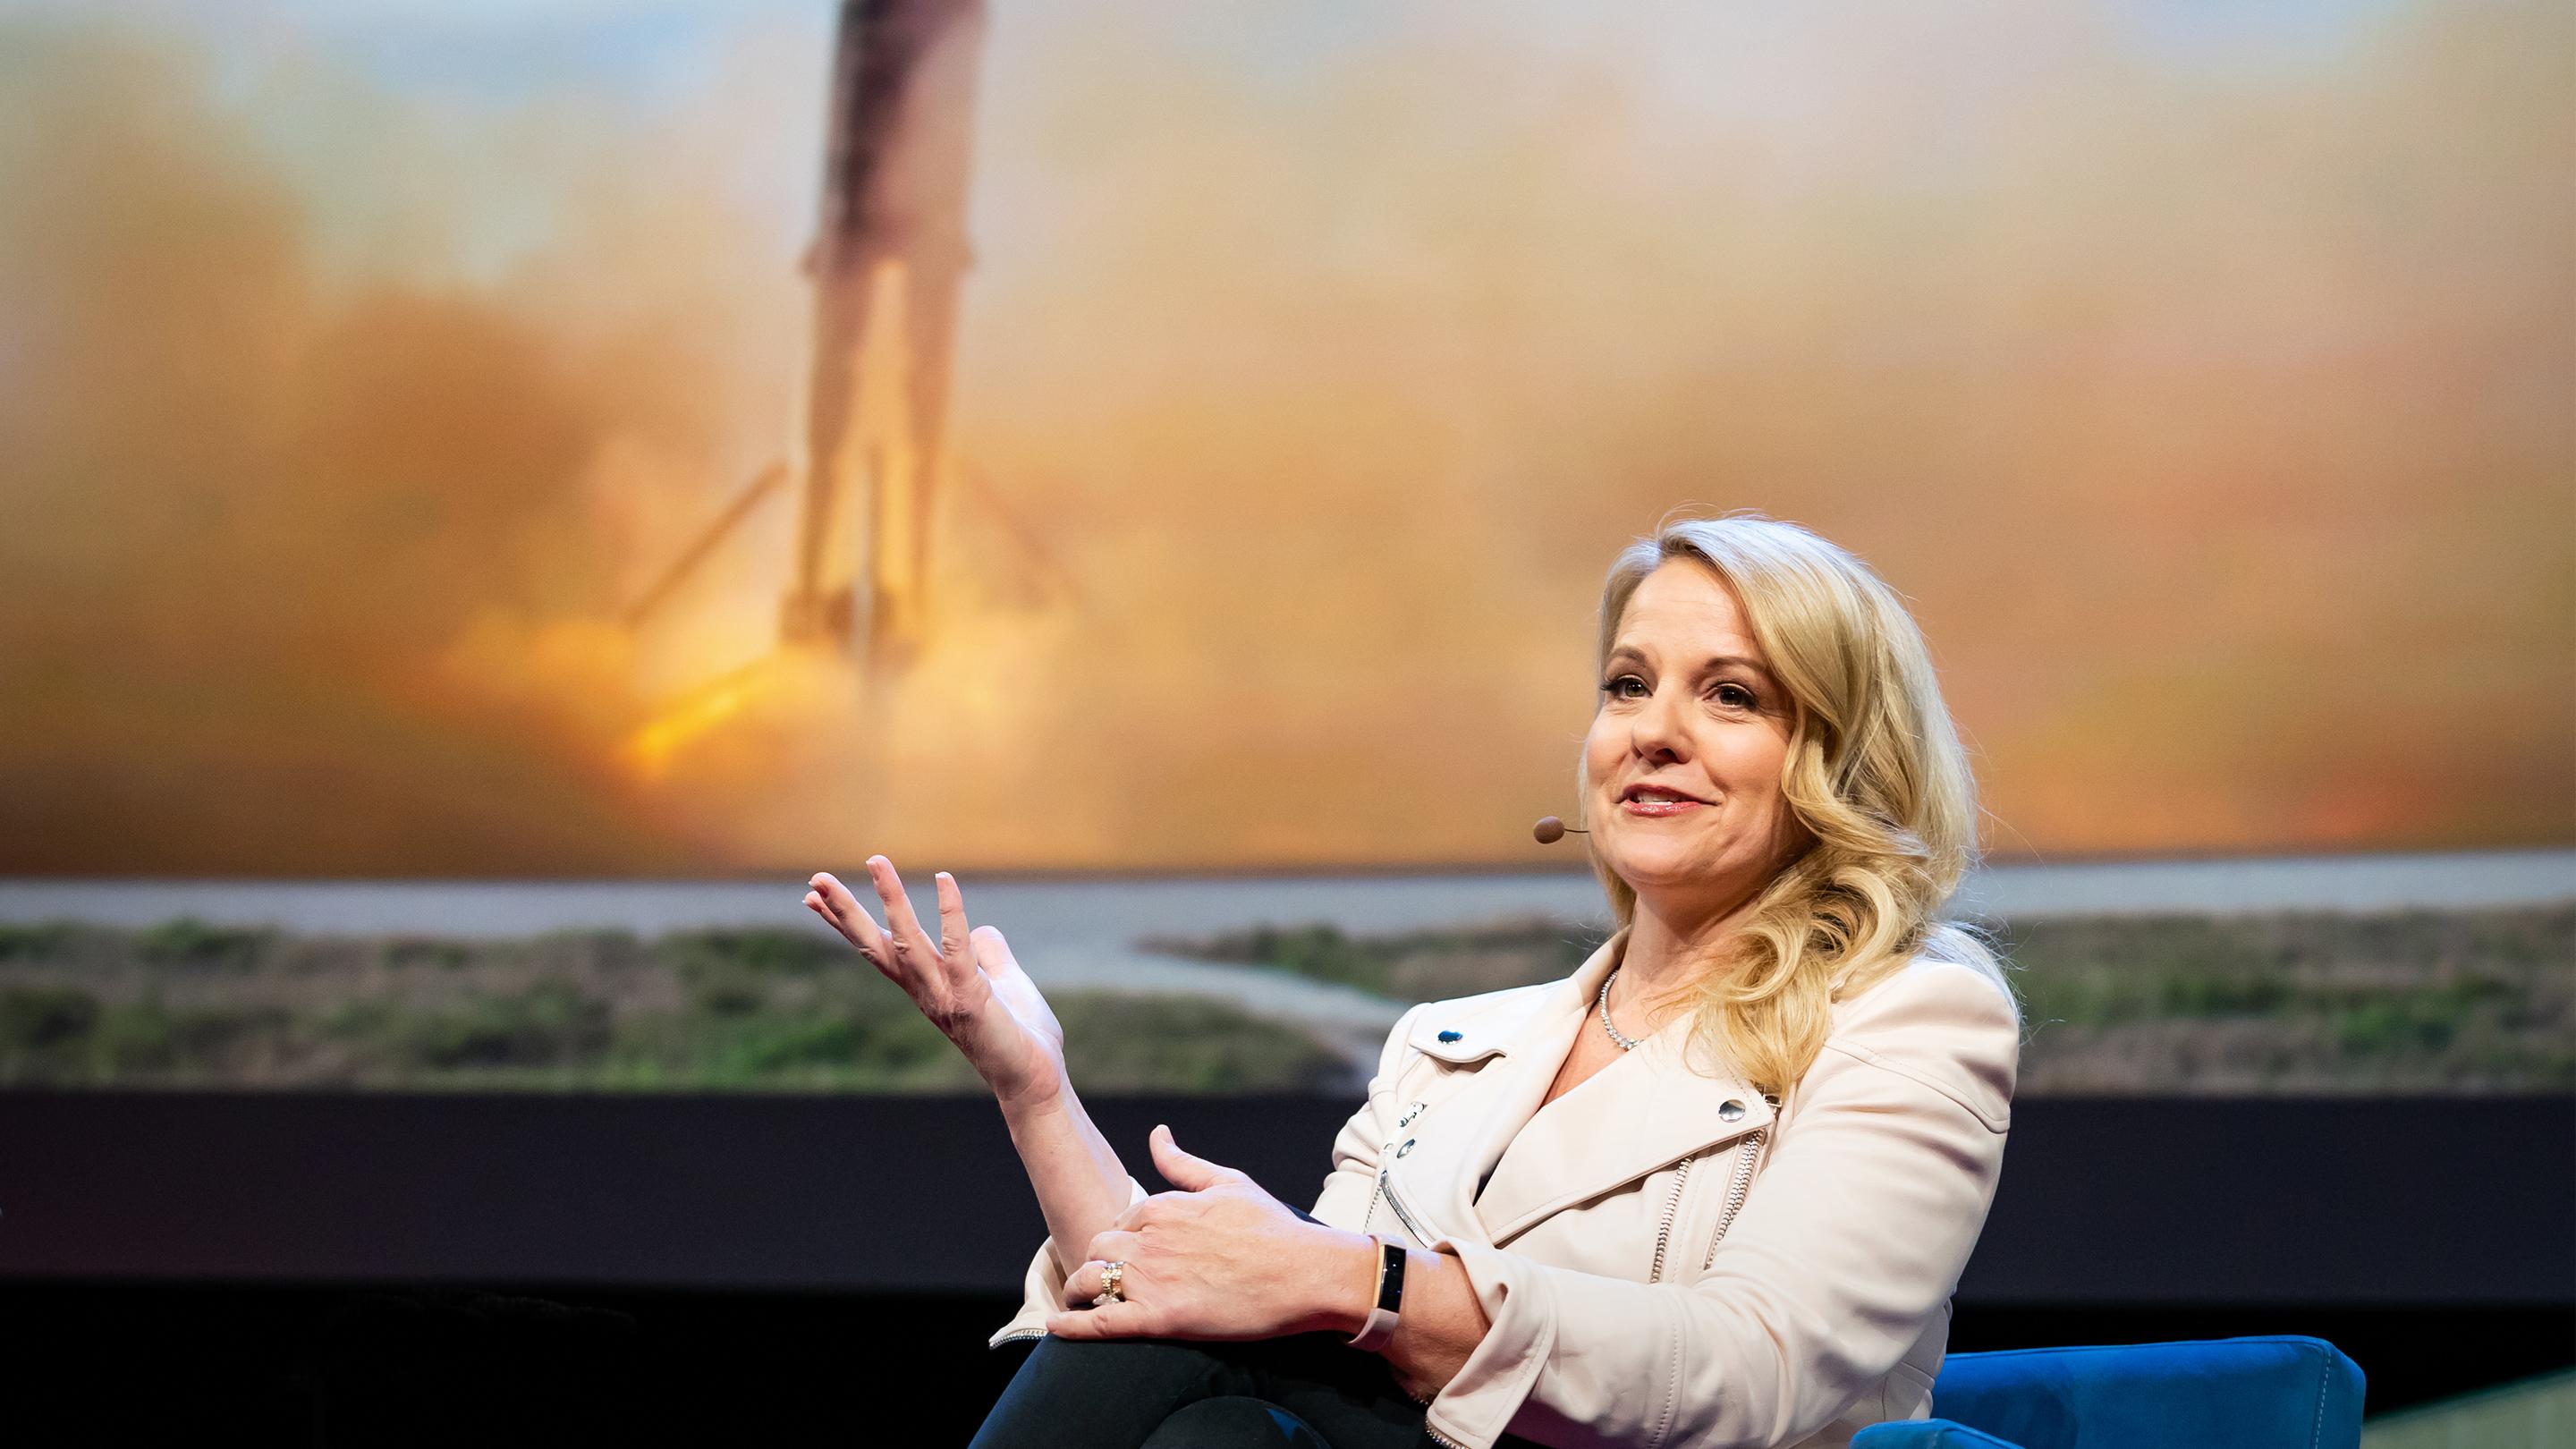 SpaceX’s plan to fly you across the globe in 30 minutes | Gwynne Shotwell